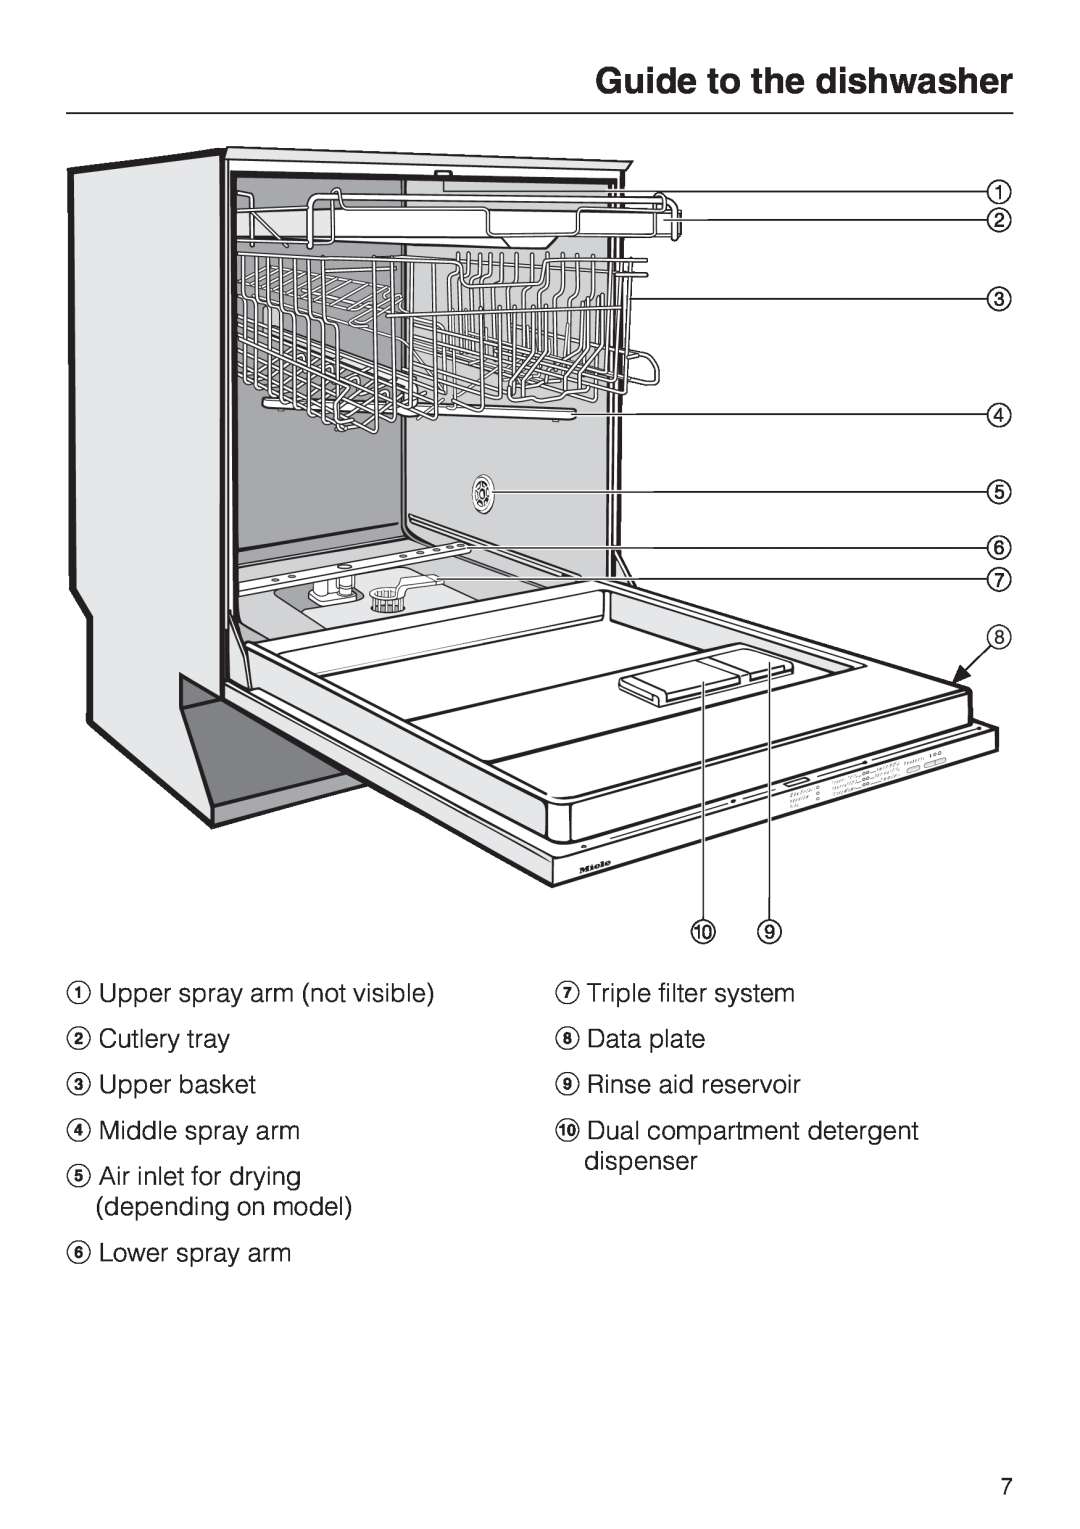 Miele G 1181, G 2181 Guide to the dishwasher, Upper spray arm not visible Cutlery tray, Upper basket Middle spray arm 